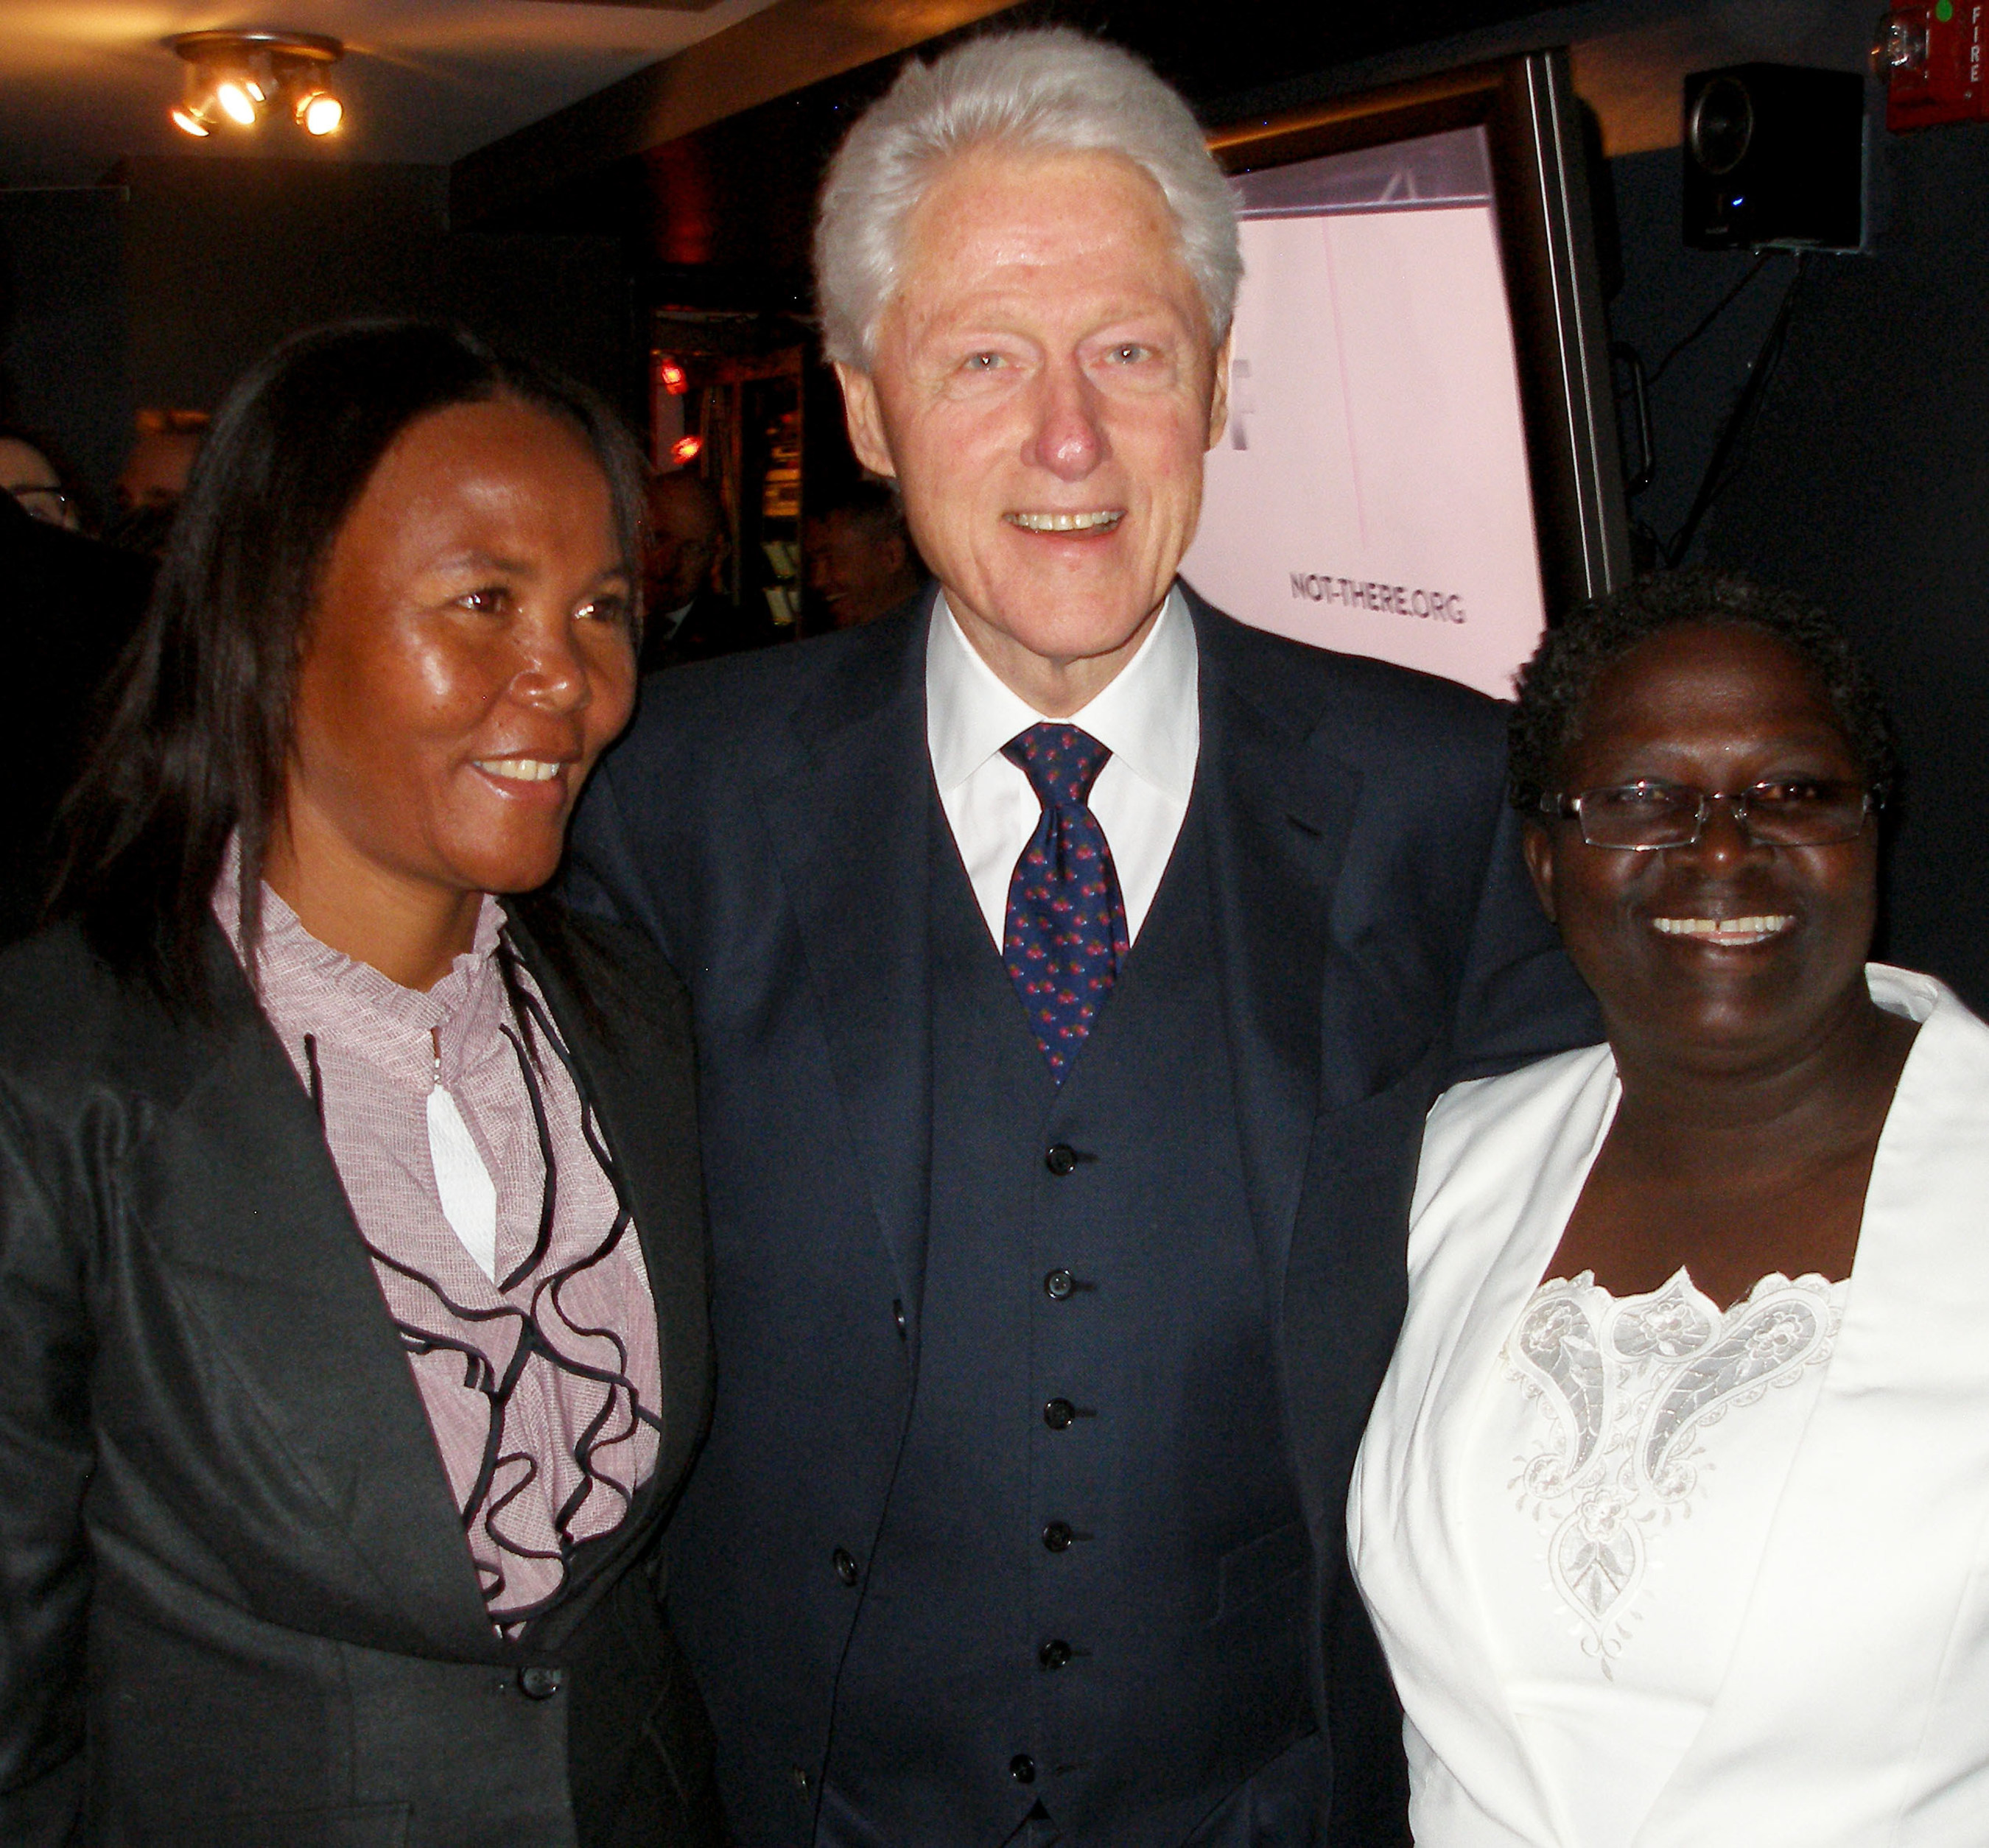 Midwives For Haiti graduates, Genette Thelusmond and Magdala Jean, are thanked for their work to reduce maternal and infant mortality in Haiti by Former President Bill Clinton in New York City on March 9, 2015. Midwives For Haiti is a Richmond, Virginia non-profit organization working in Haiti to educate skilled birth attendants and increase access to skilled maternity care through several high impact health projects.